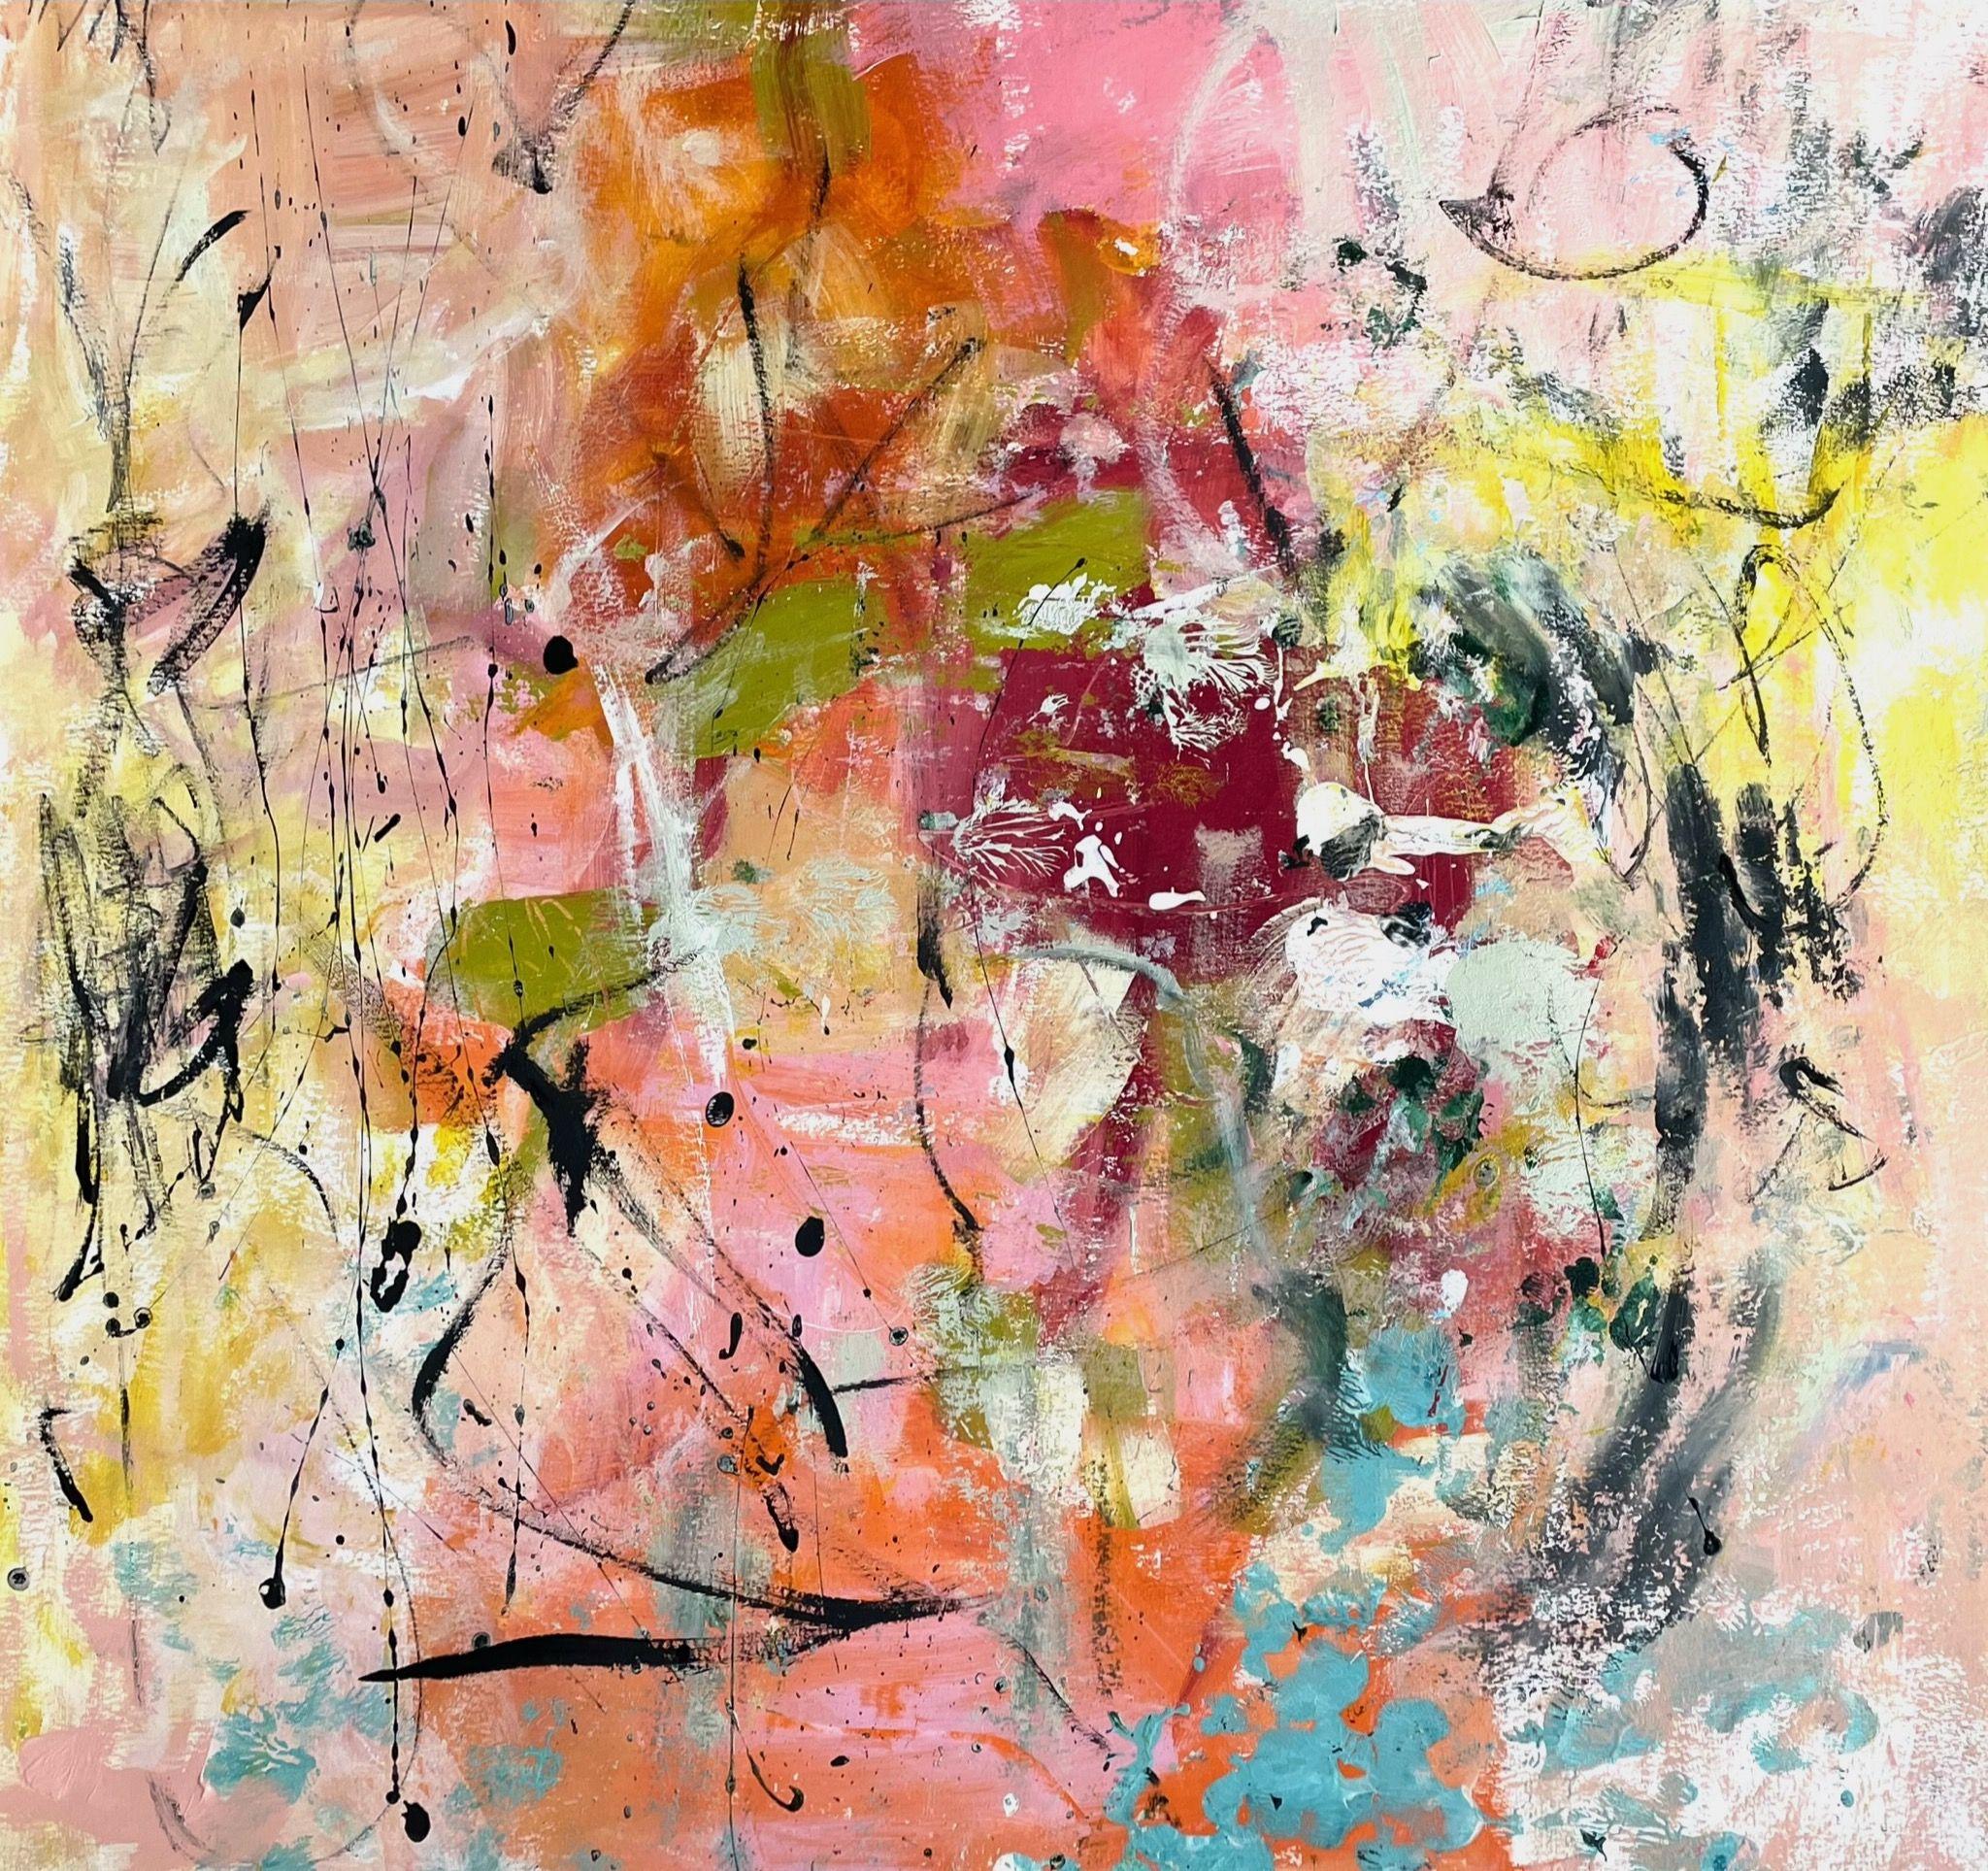   "SelbstgesprÃ¤che" is an abstract, gestural-dynamic acrylic painting on thick paper. The main colors are orange, pink, red, yellow, black and white.   It is a positive bold artwork that has a very hilarious touch.    The painting is signed on the